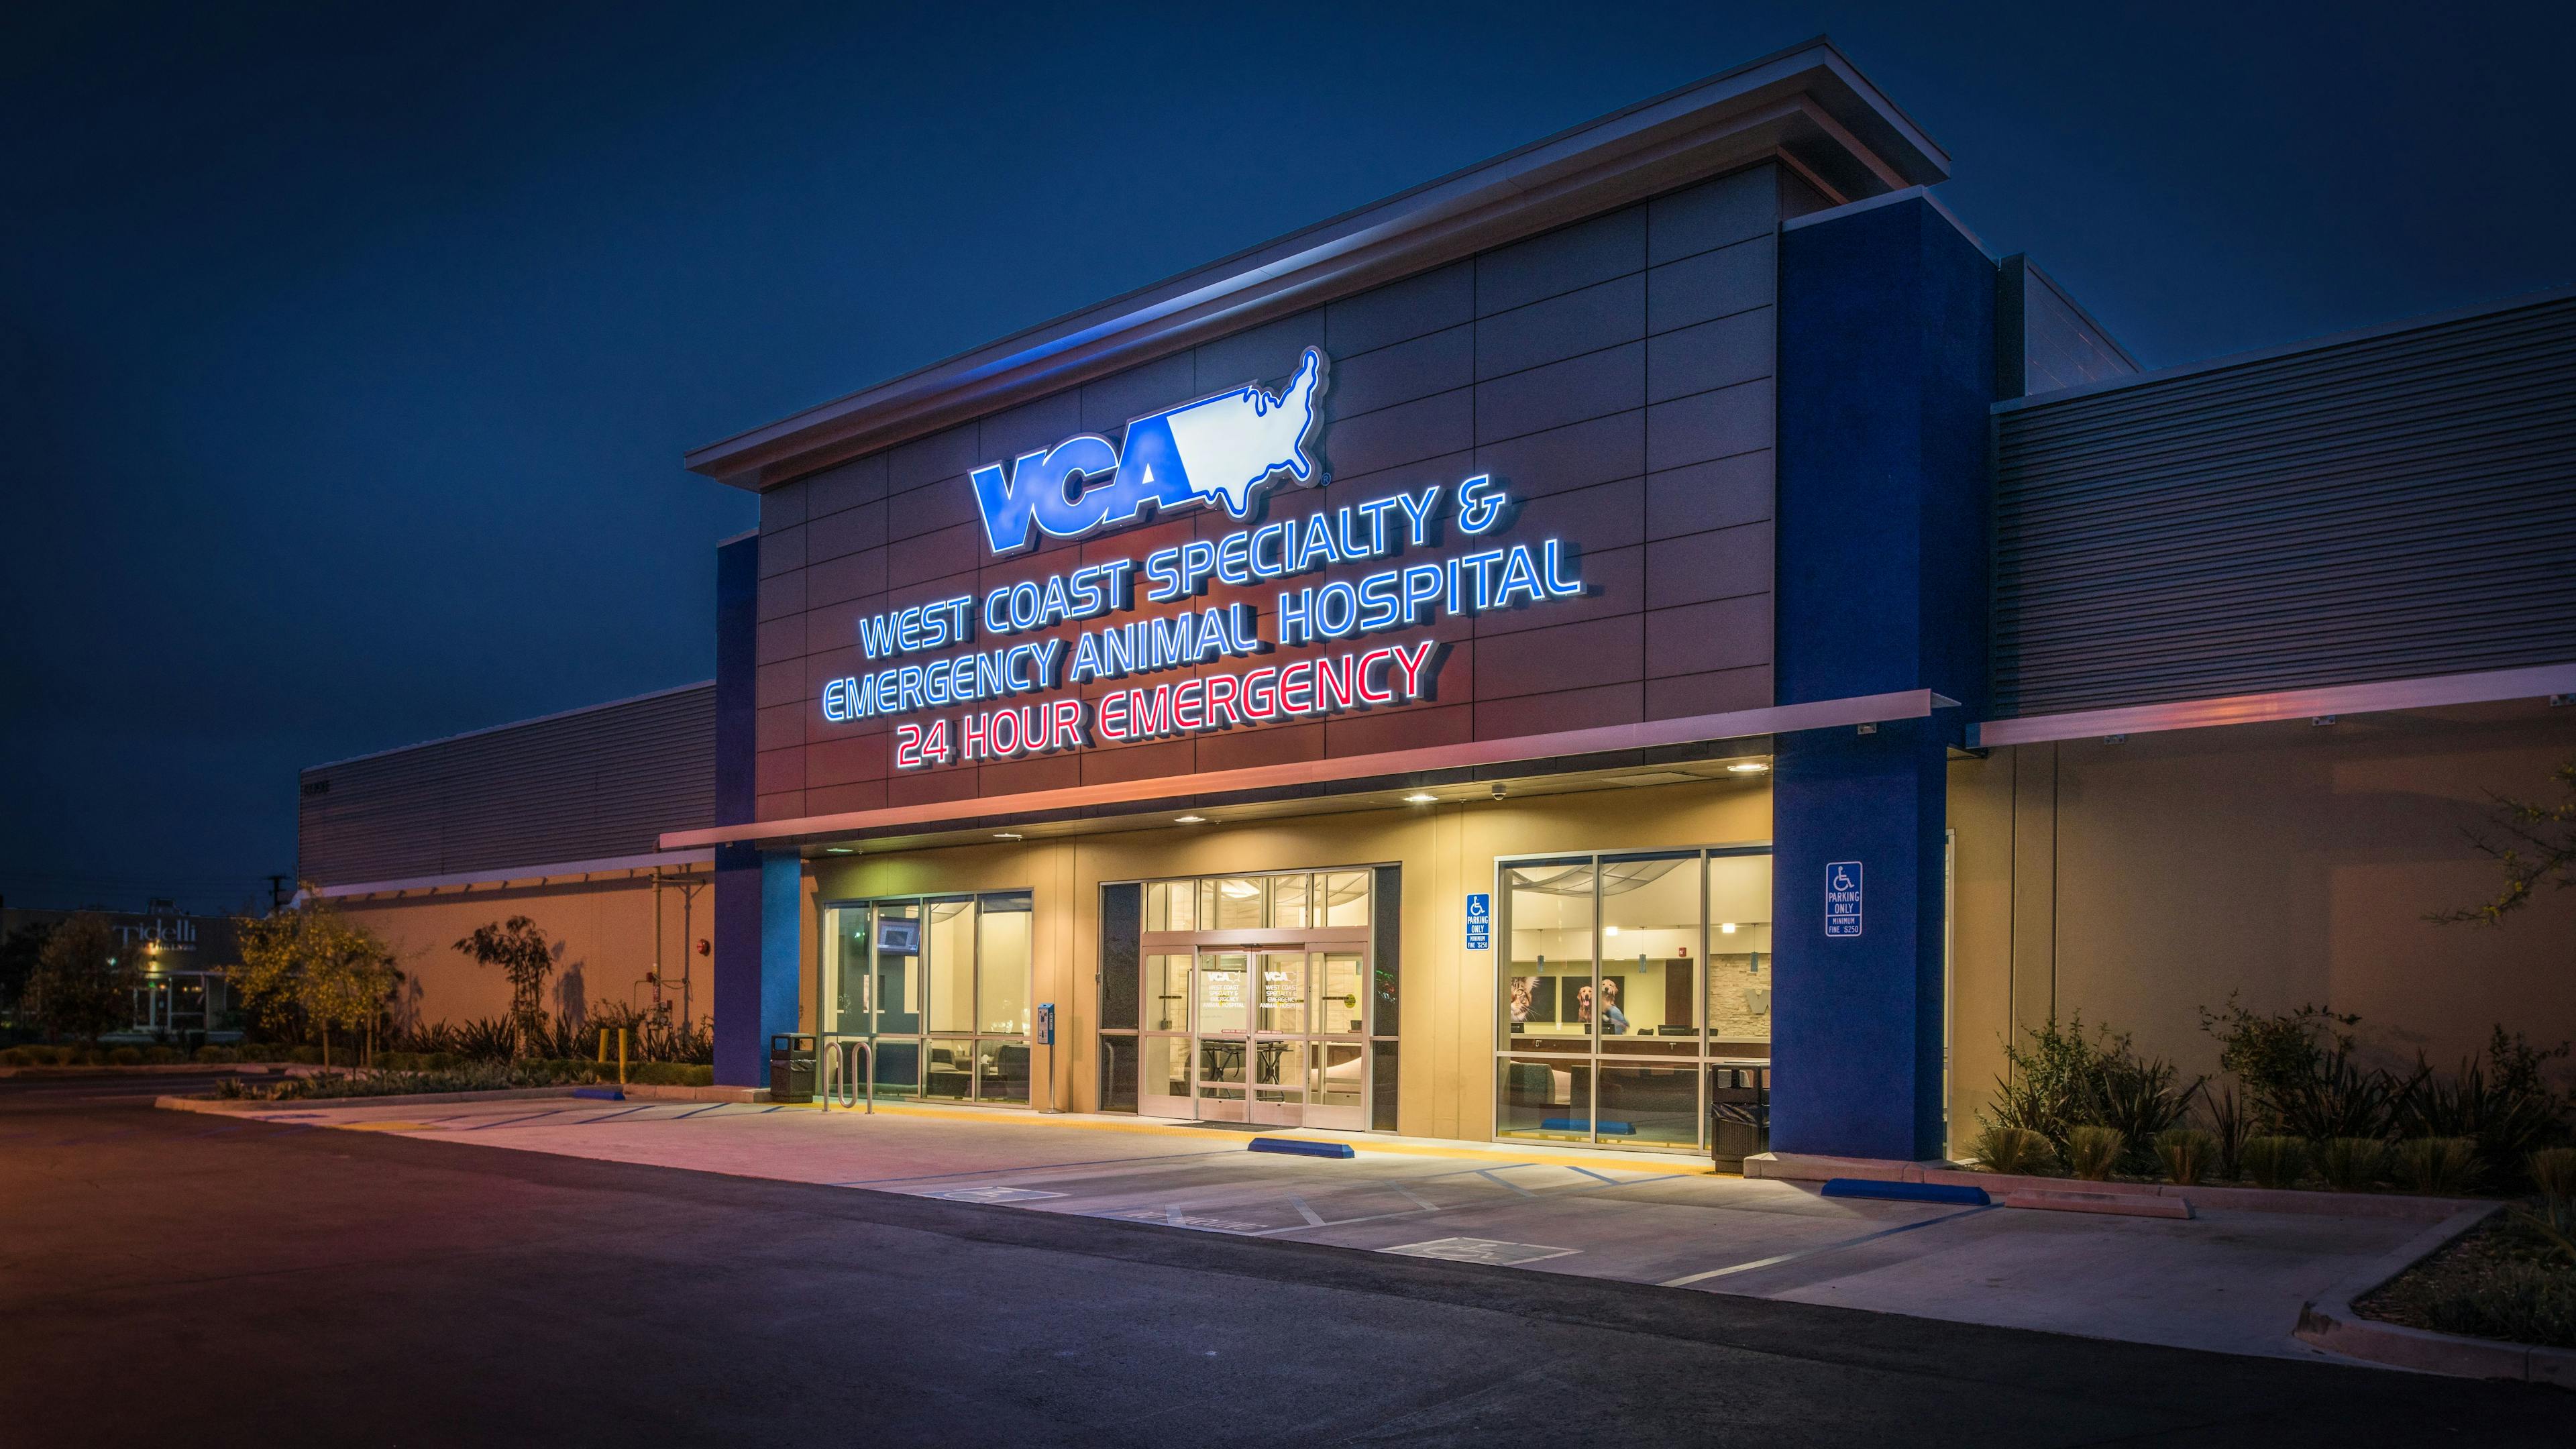 Housed in a former Staples building, VCA West Coast Specialty and Emergency Animal Hospital makes a statement with a large, lighted sign and storefront windows that give the public a peek into the spacious hospital.